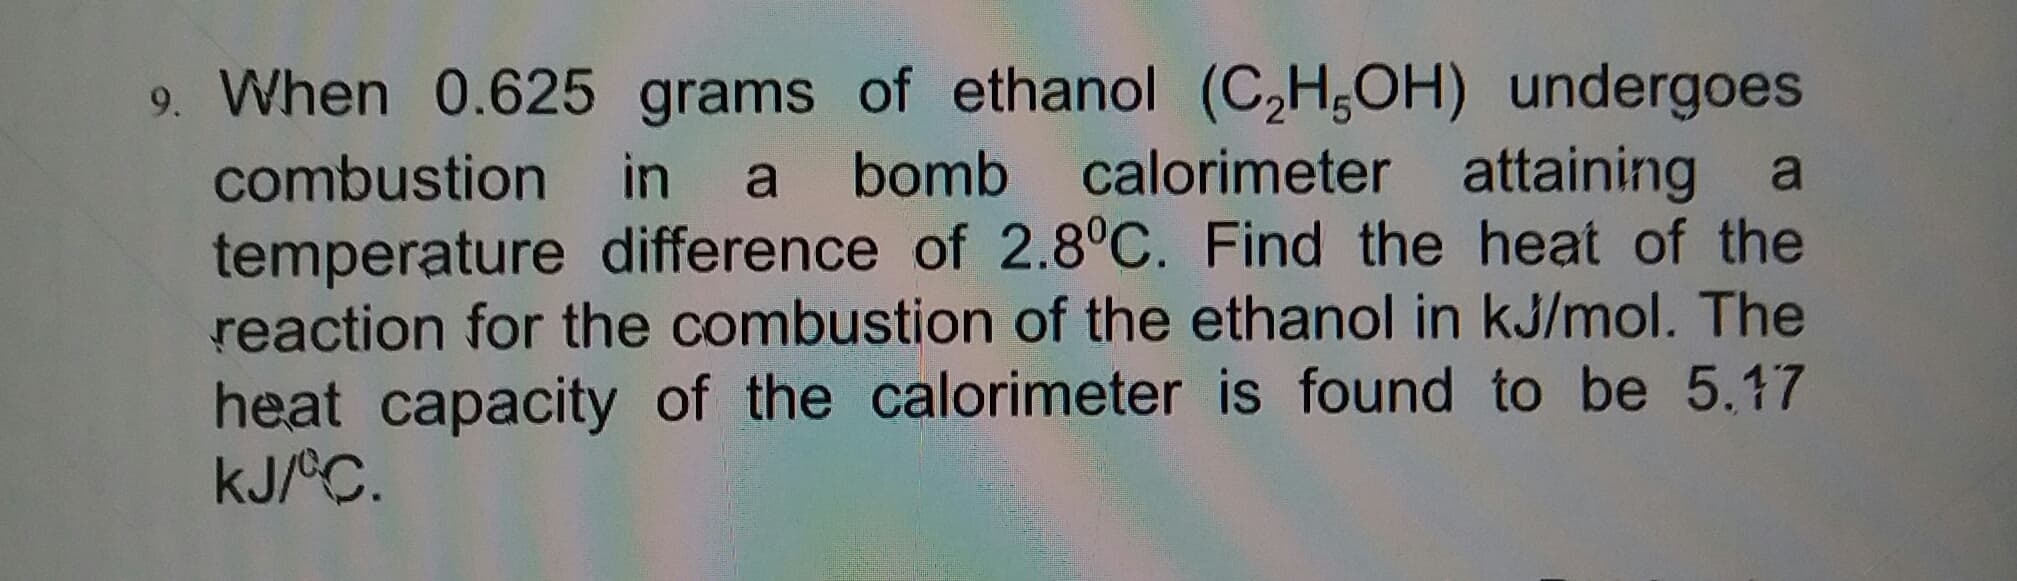 9. When 0.625 grams of ethanol (C,H,OH) undergoes
a bomb calorimeter attaining
temperature difference of 2.8°C. Find the heat of the
reaction for the combustion of the ethanol in kJ/mol. The
combustion in
a
heat capacity of the calorimeter is found to be 5.17
kJ/°C.
